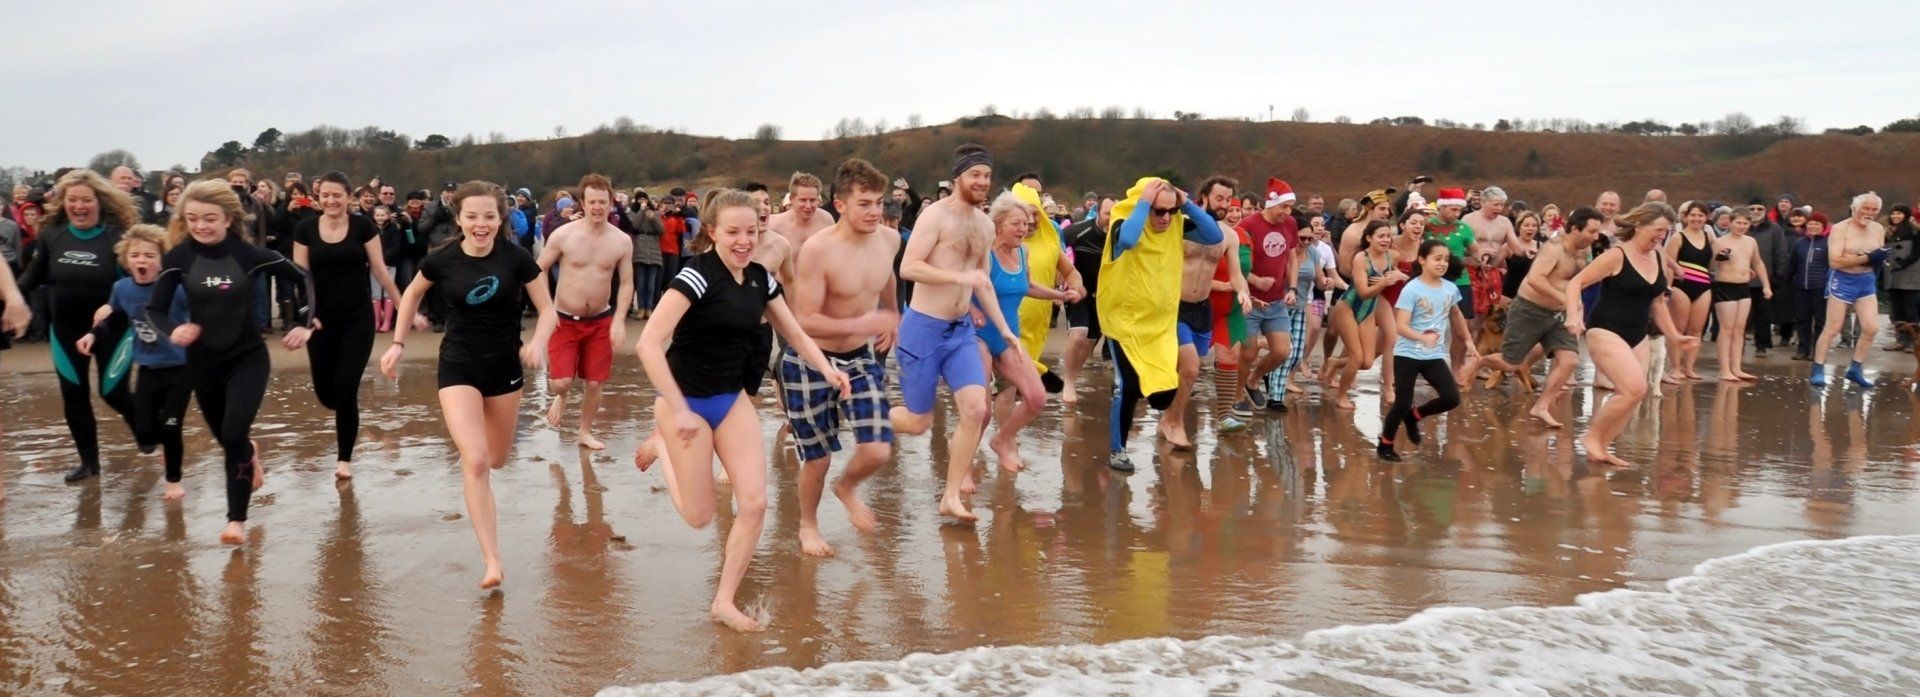 New Year's Day swimmers  rush towards  the sea